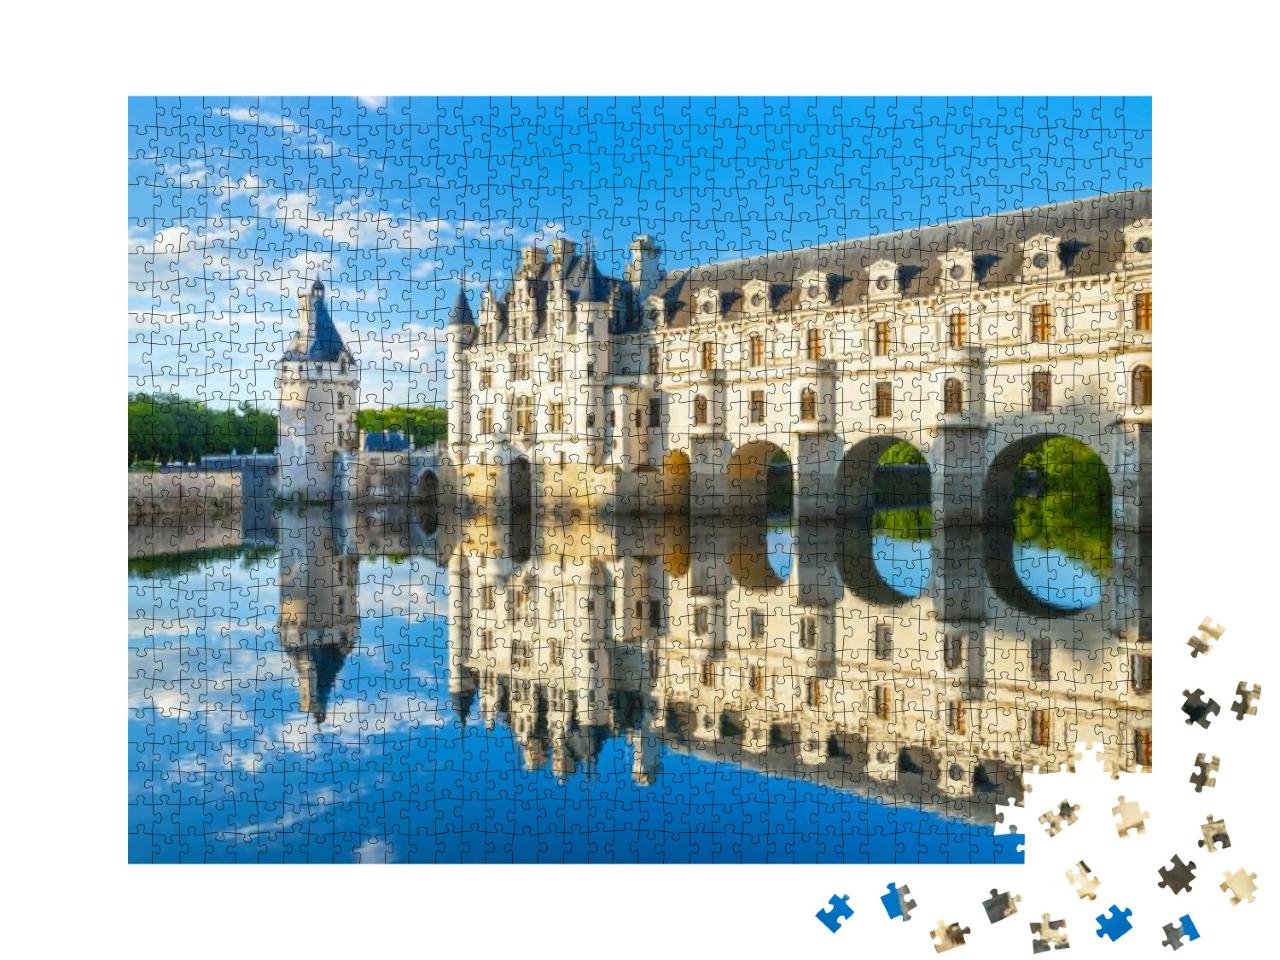 Chateau De Chenonceau is a French Castle Spanning the Riv... Jigsaw Puzzle with 1000 pieces